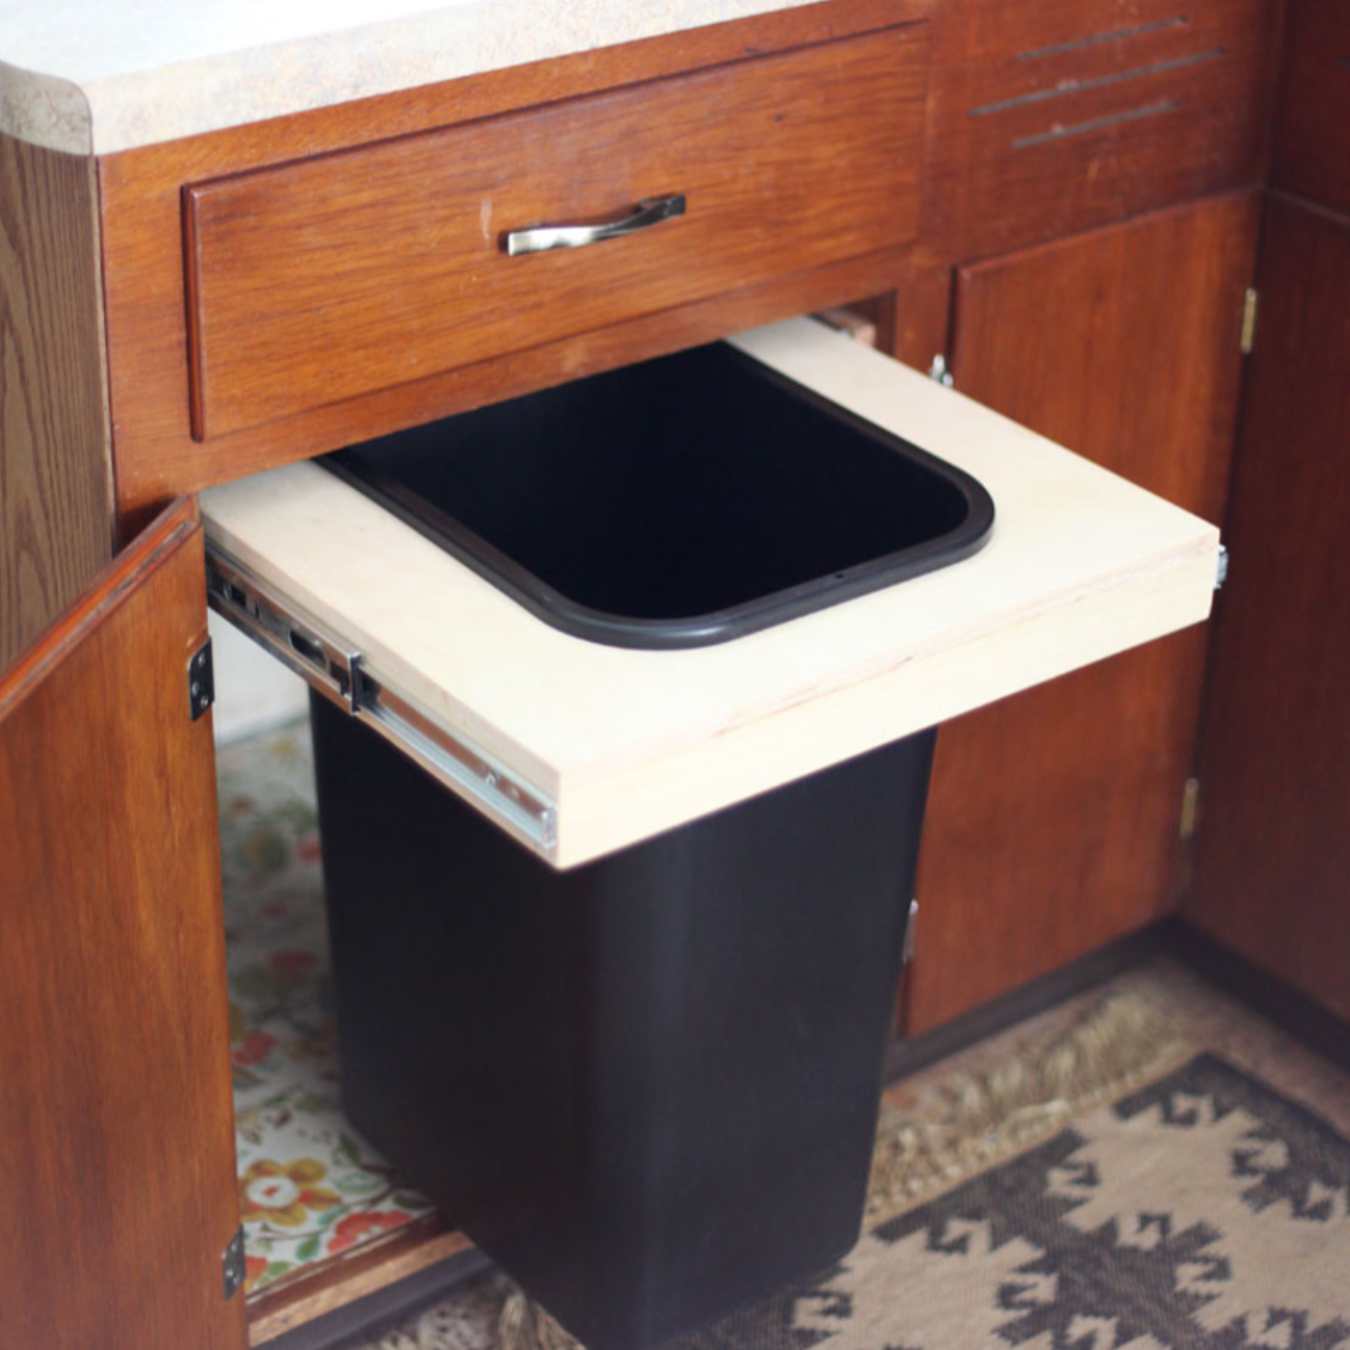 How To Make A Cabinet Into A Trash Can